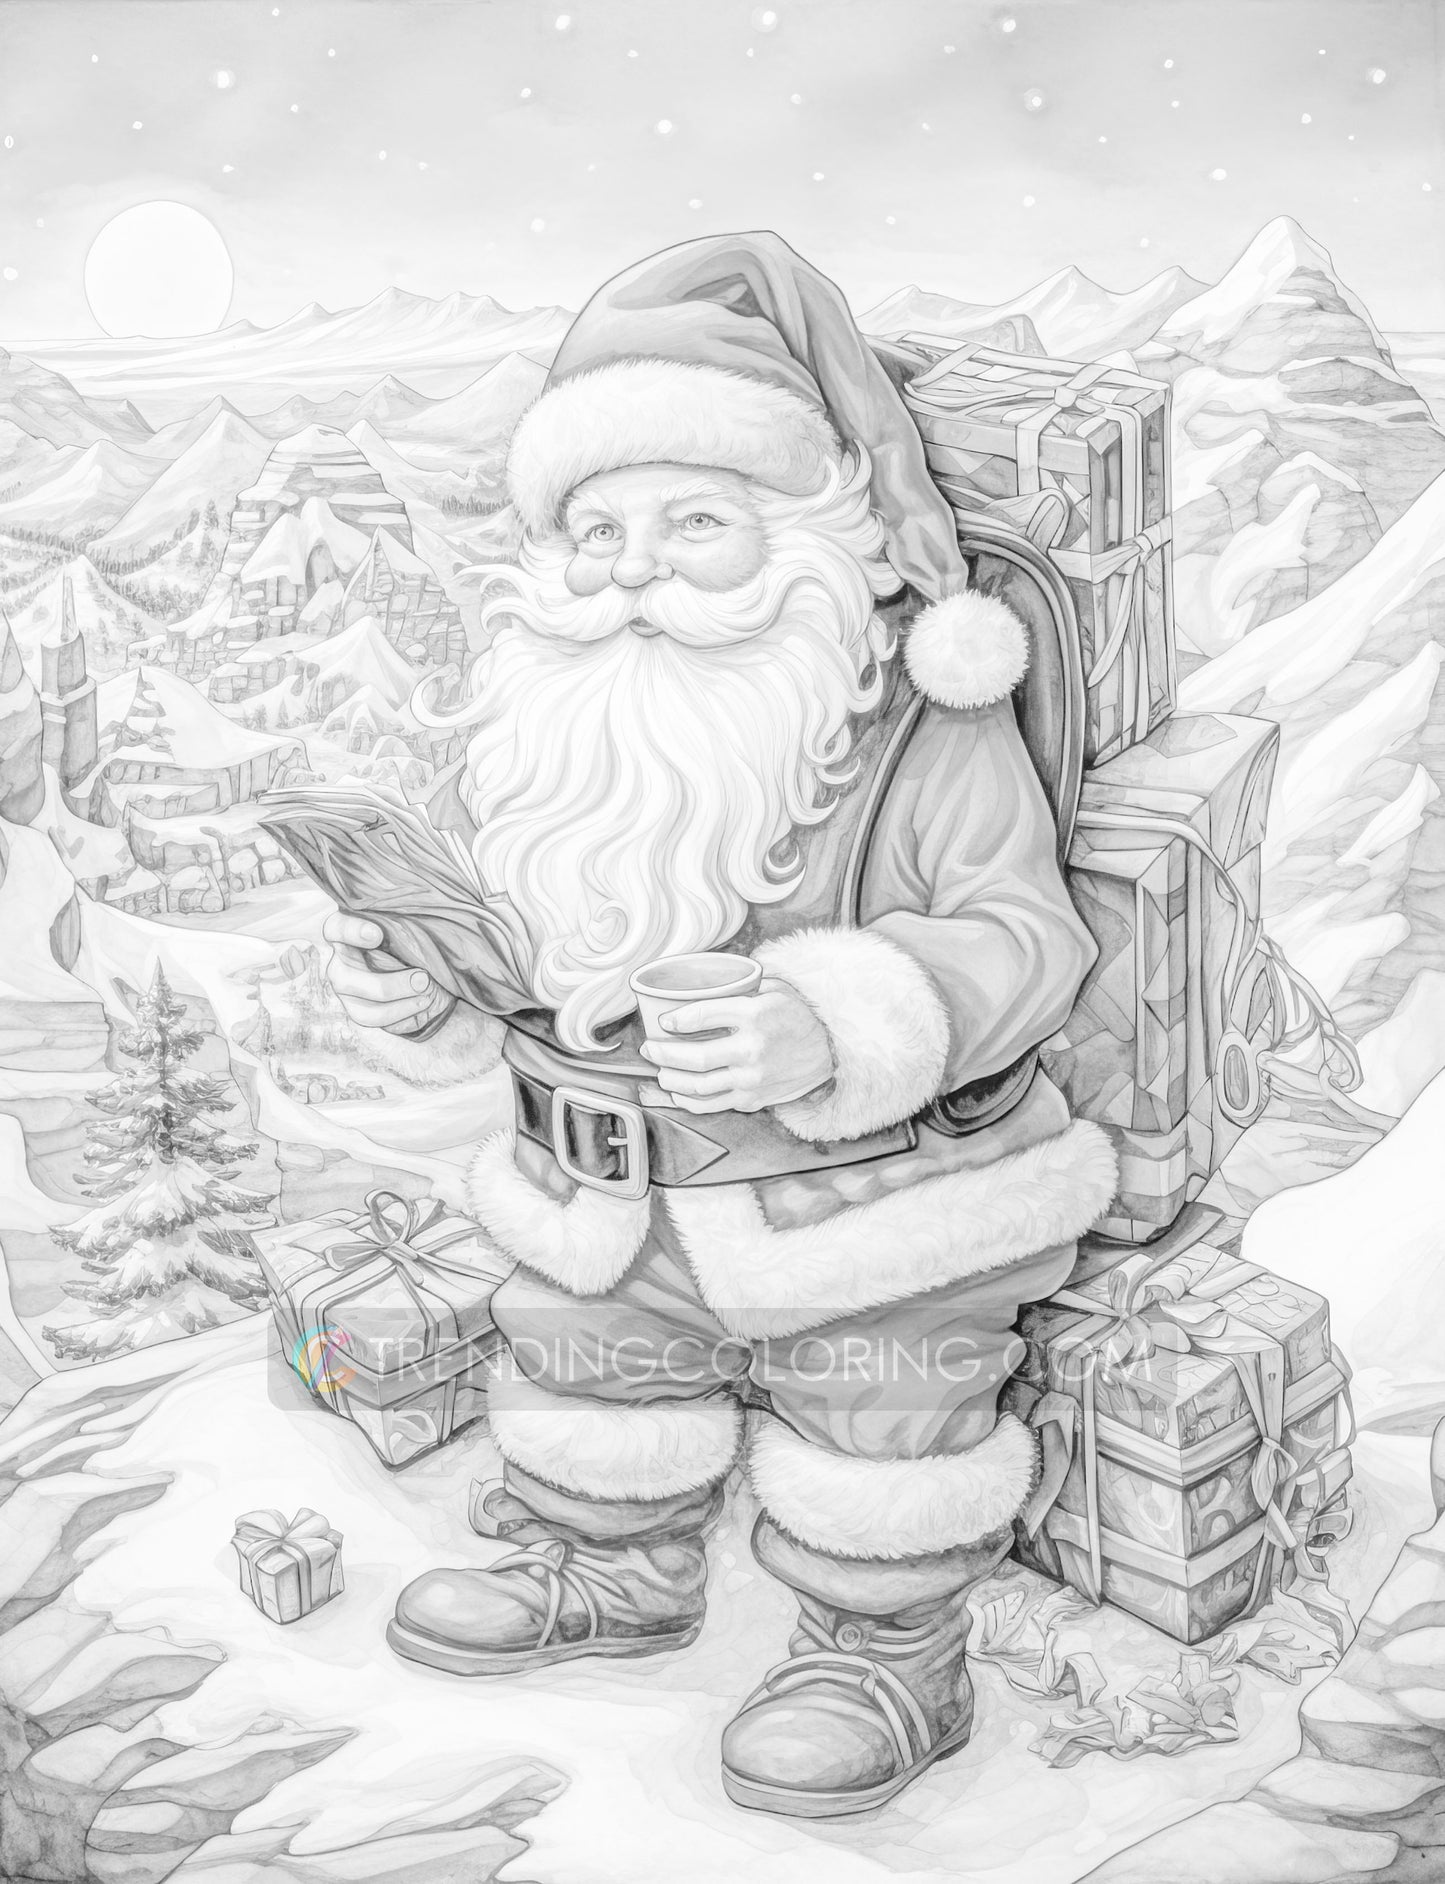 50 Santa Claus's Life Grayscale Coloring Pages - Instant Download - Printable PDF Dark/Light